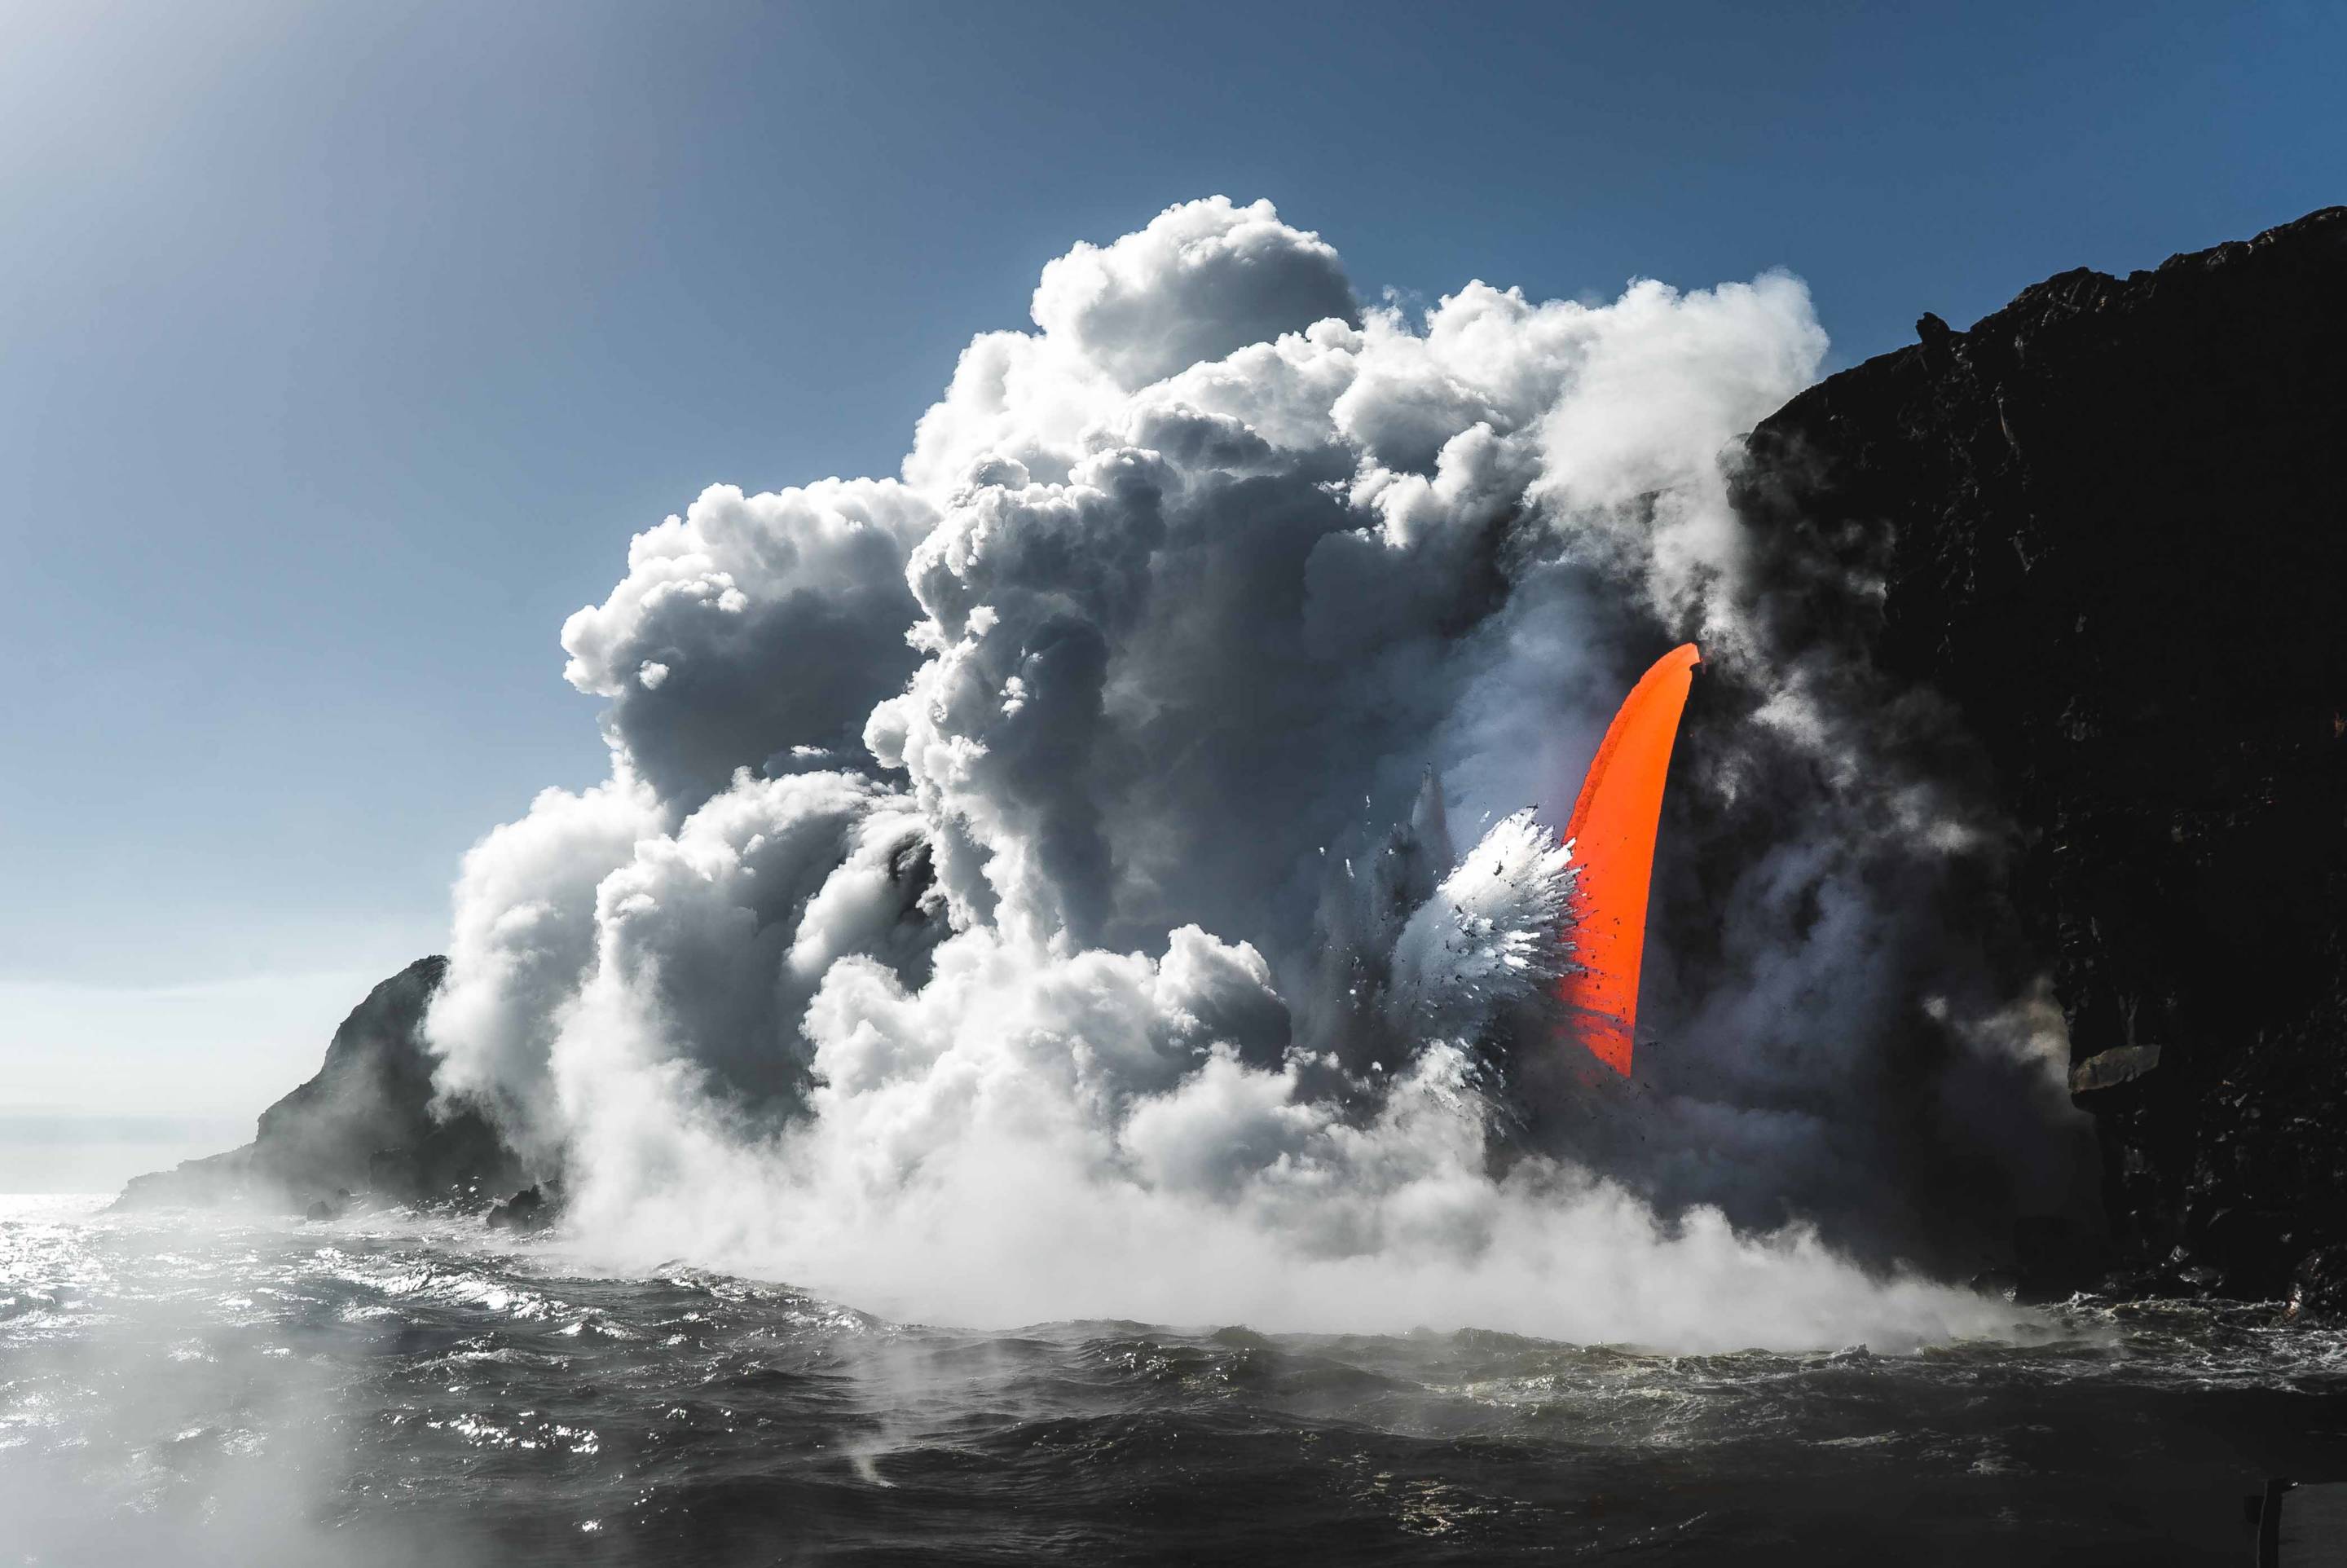 A fire hose lava spout in Hawaii Volcanoes National Park viewed from a boat